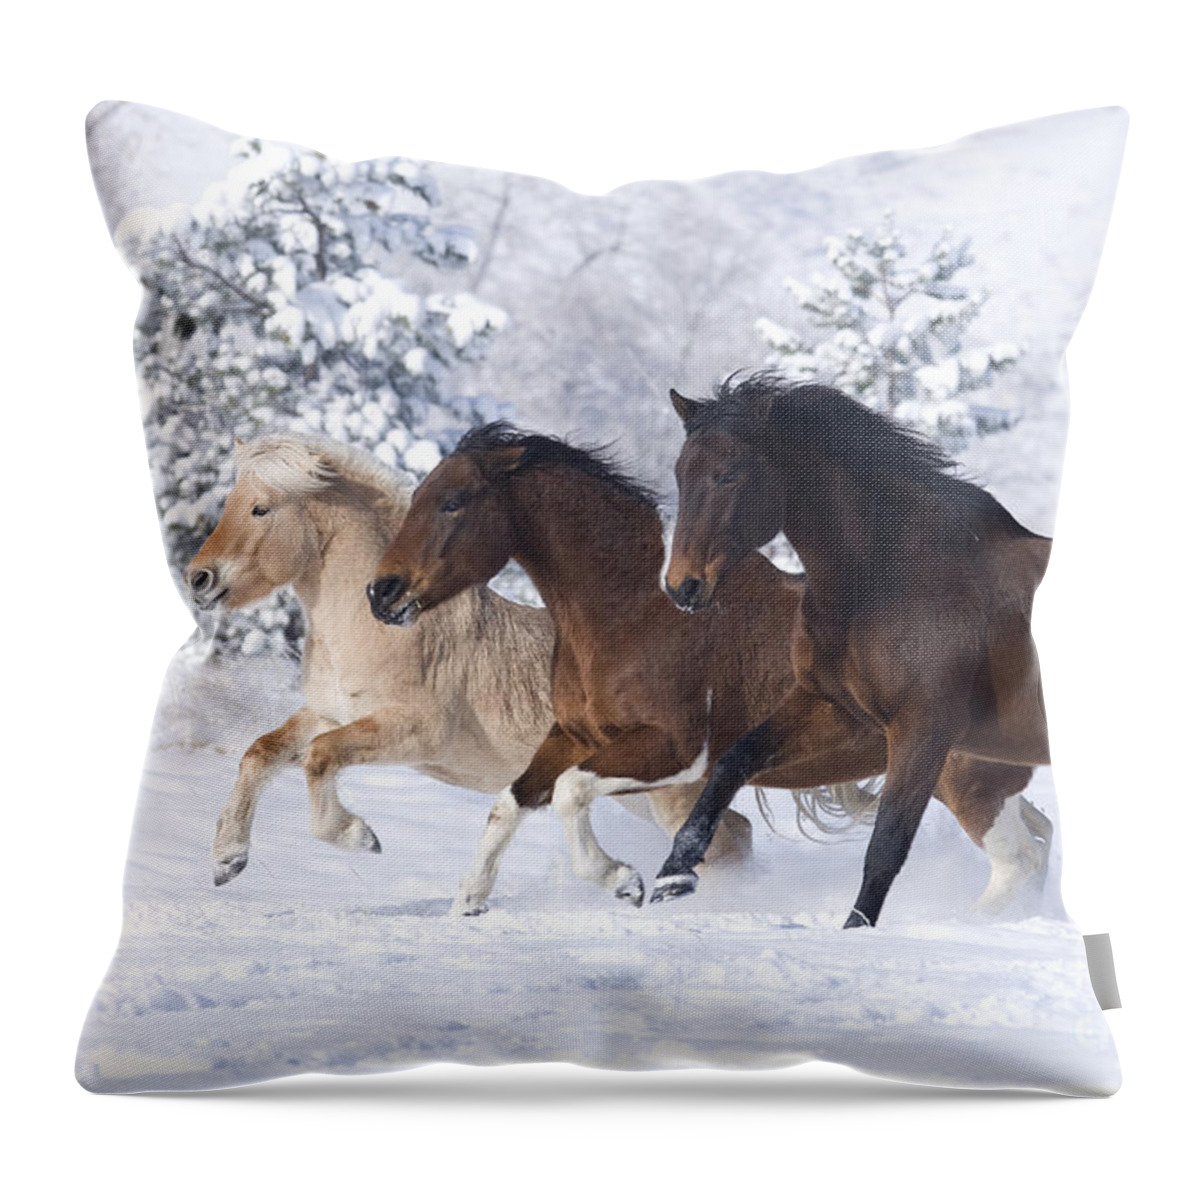 Horse Throw Pillow featuring the photograph Three Snow Horses by Carol Walker